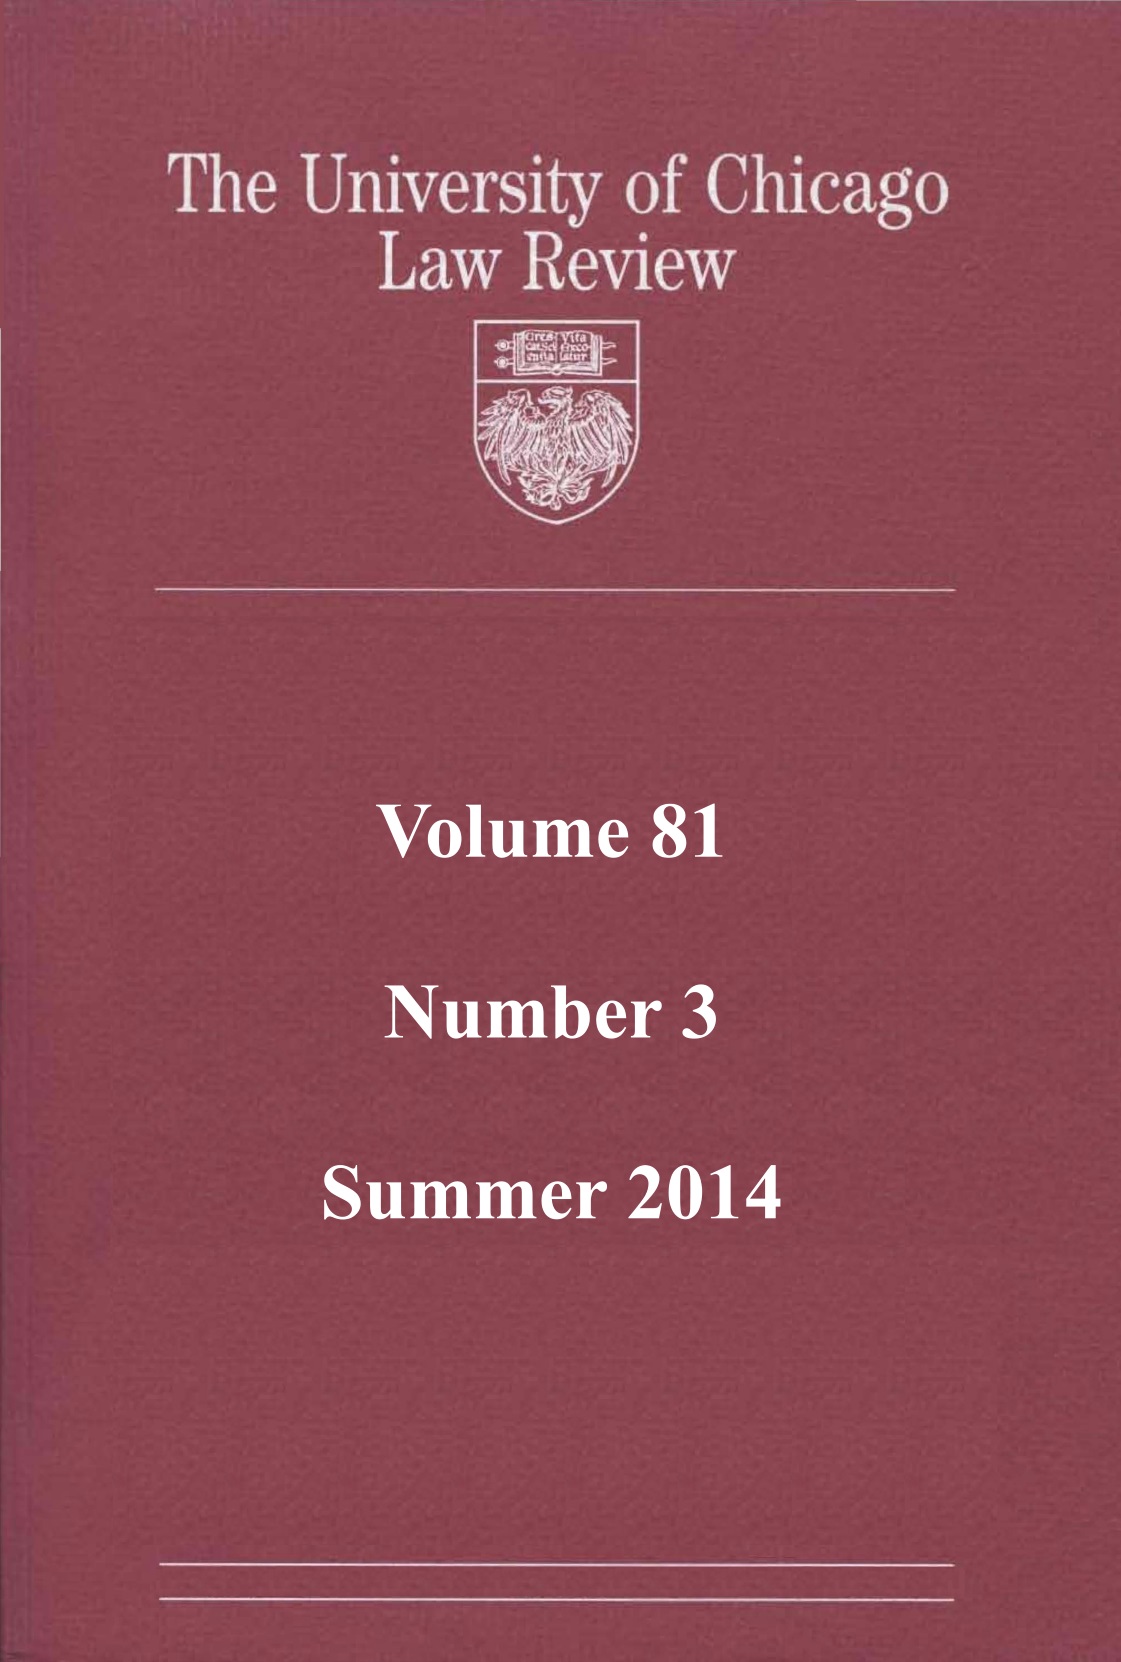 University of Chicago Law Review, 3 of 2014 on precedent